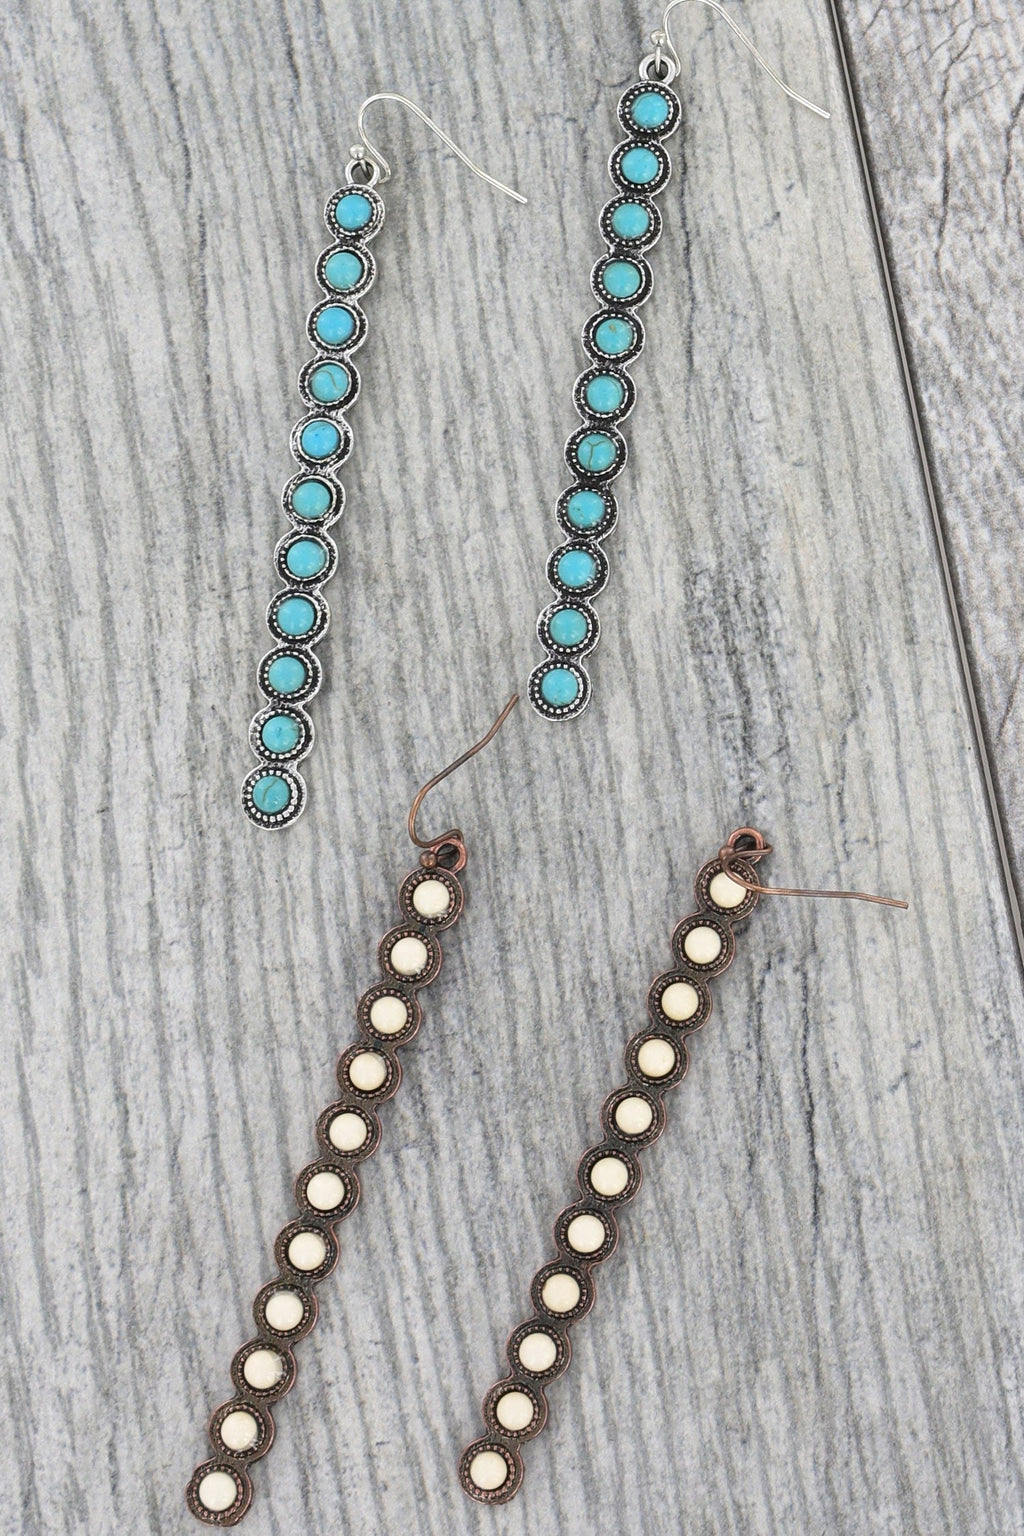 WESTERN LINEAR LONG DROP TURQUOISE HOOK EARRINGS IN OXIDIZED SILVER AND COPPER TONE METAL HEIGHT: 3.25" WIDTH: 0.25" LONG LINEAR RECTANGULAR GEOMETRIC INLAY INLAID DROP TURQUOISE SEMI STONE GEMSTONE COWGIRL OPEN STATEMENT SOUTHWESTERN COWBOY RODEO WILD WEST BOHO BOHEMIAN NAVAJO NATIVE AMERICAN SOUTHERN COUNTRY WESTERN EARRINGS